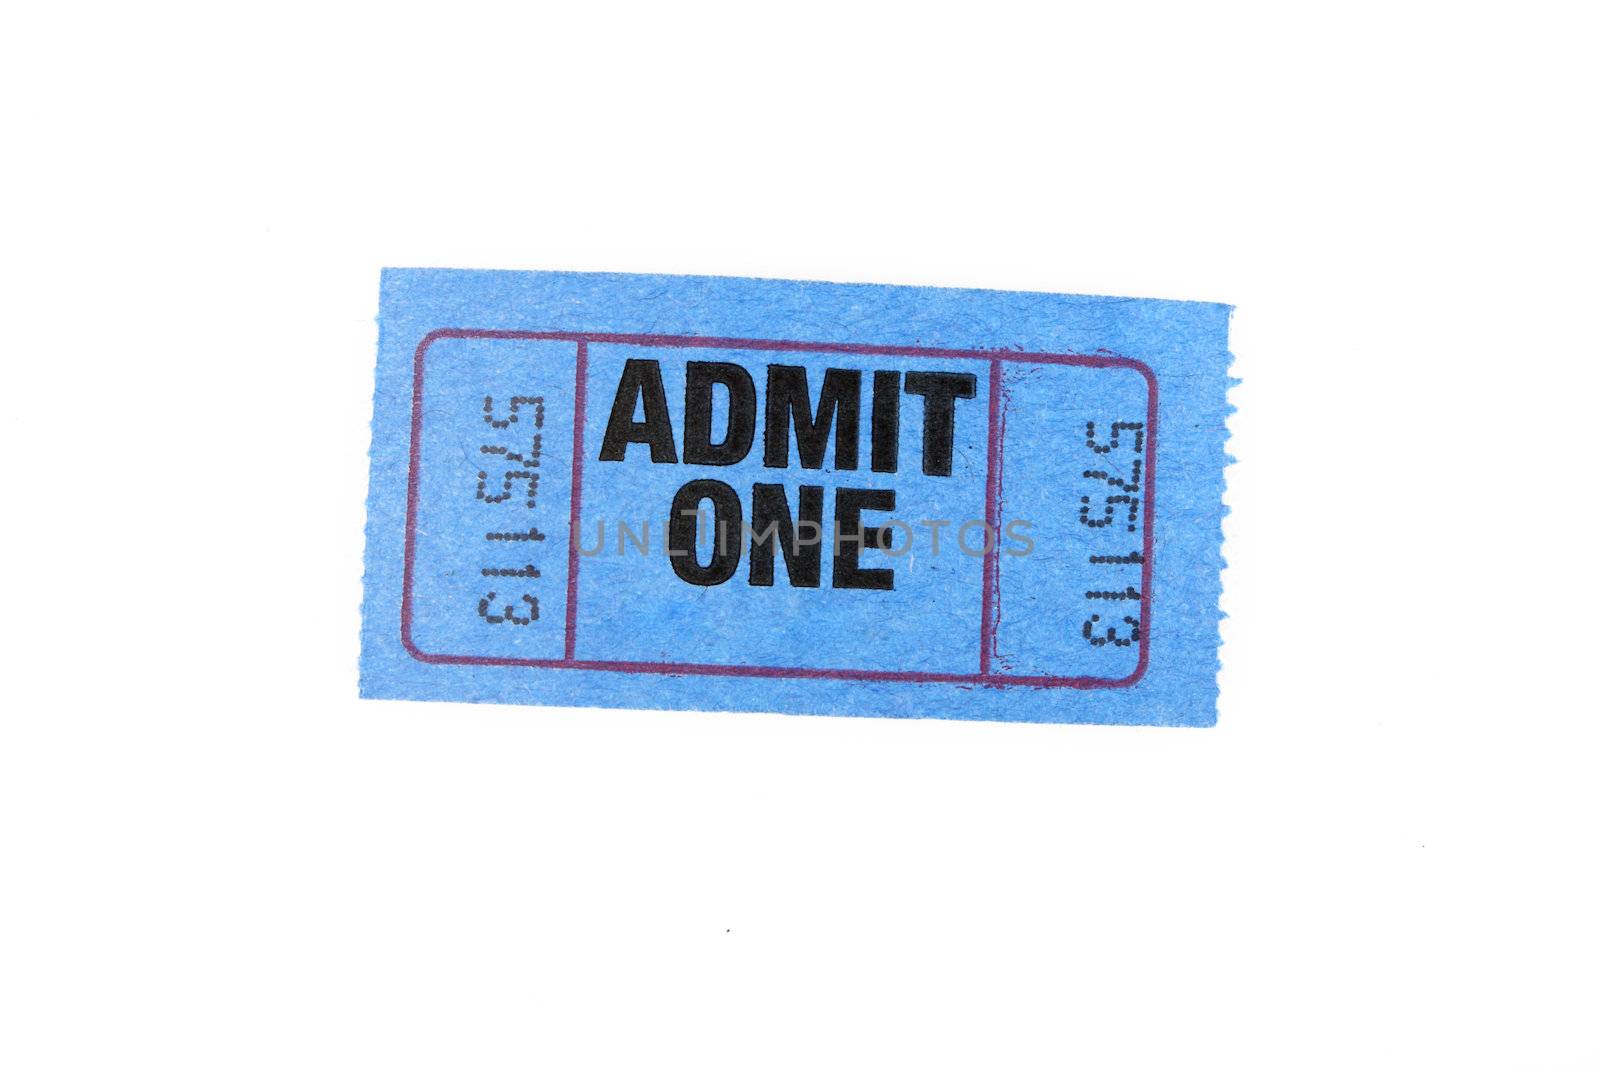 One blue admission ticket for one person